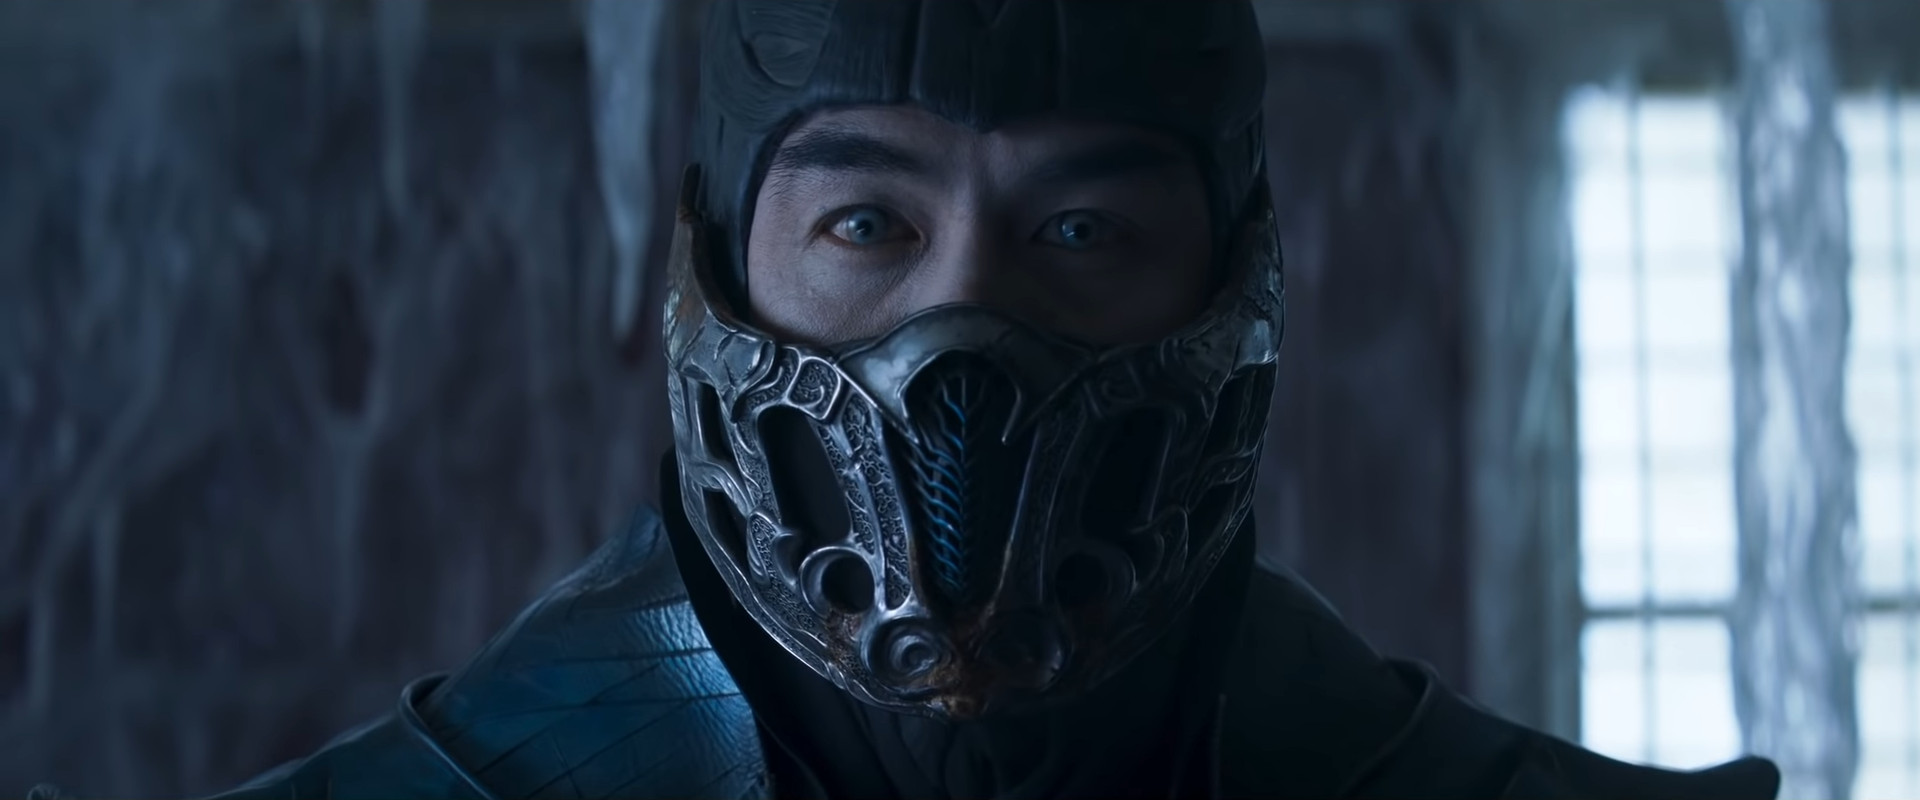 Why Make Mortal Kombat Now? Producer James Wan Weighs In